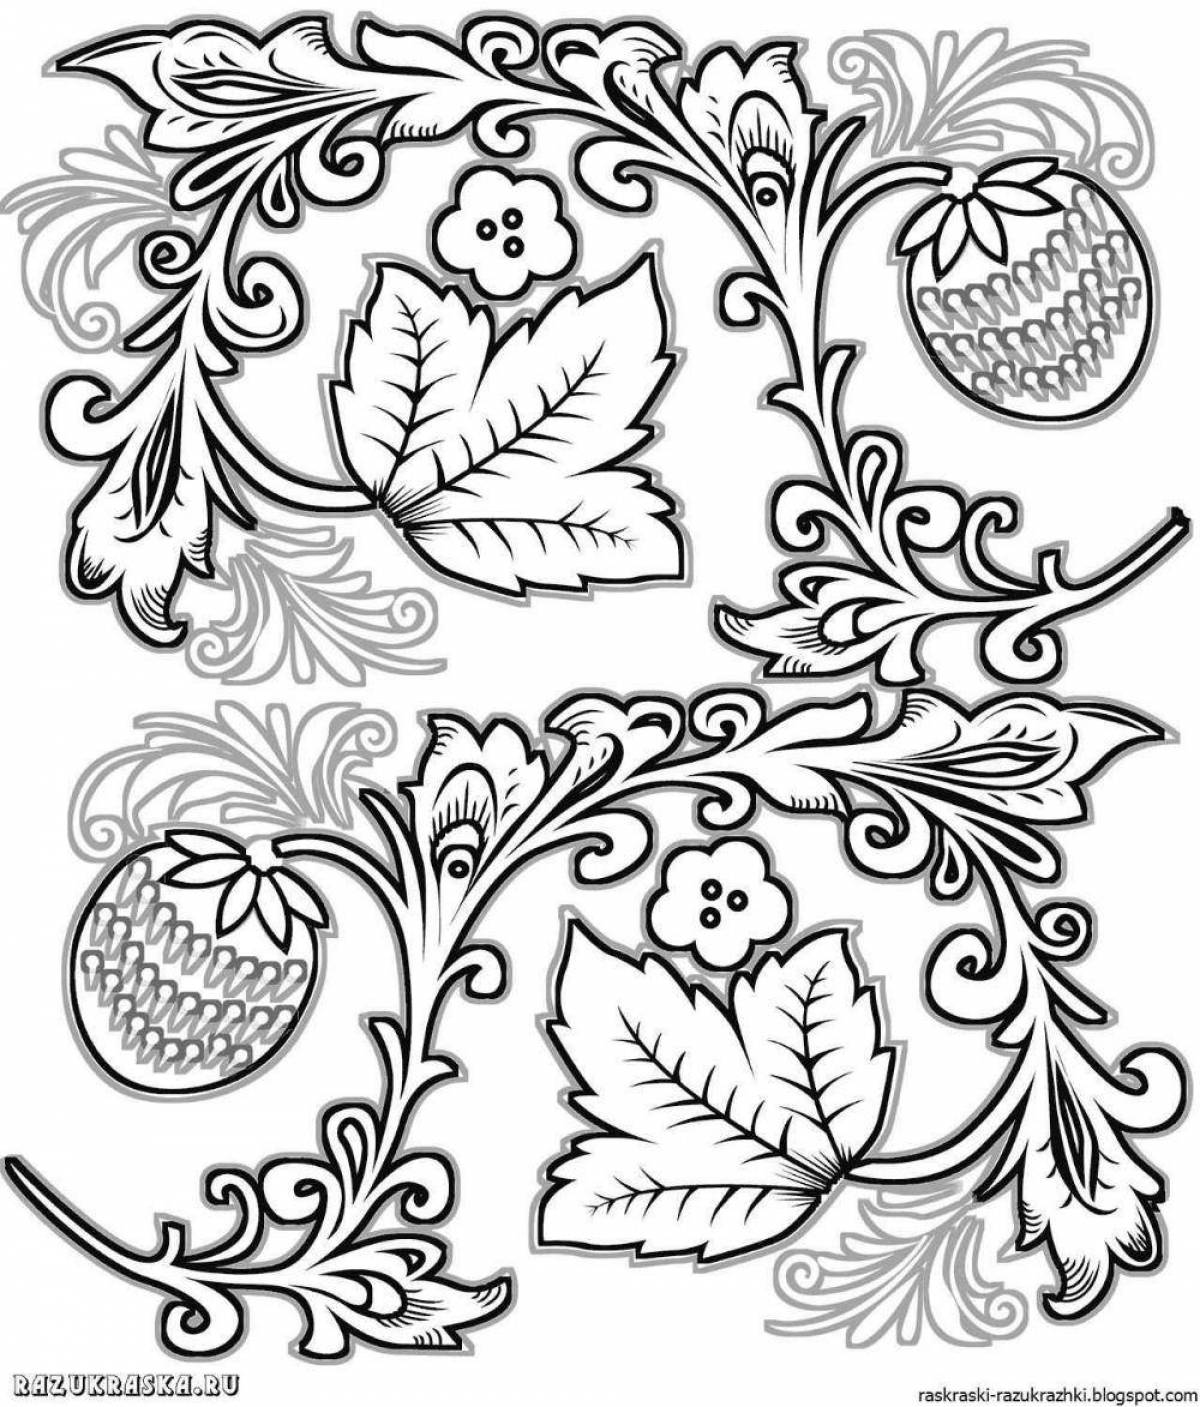 Coloring page striking Russian ornament